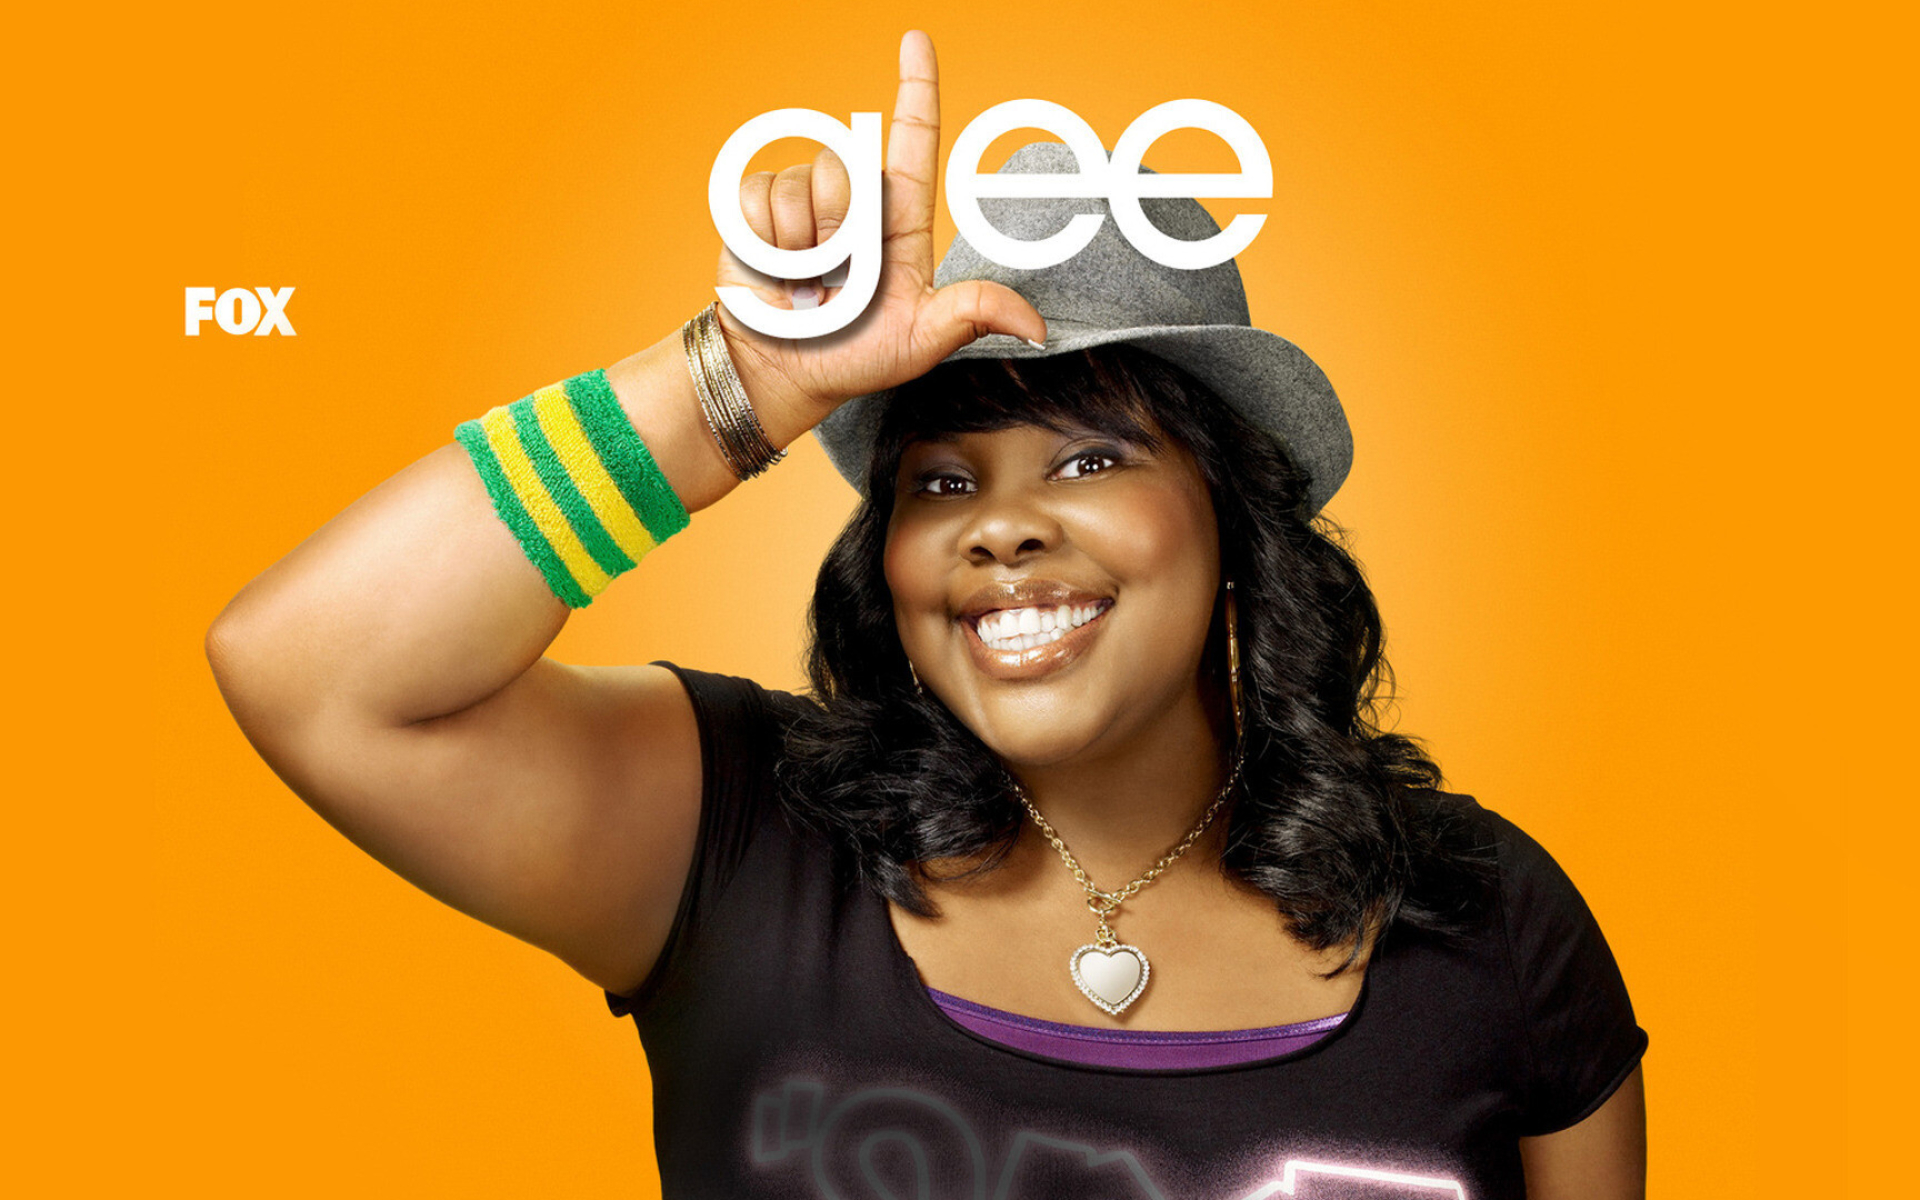 Glee (TV series): Amber Riley as Mercedes Jones, A dynamic diva-in-training who refuses to sing back-up. 1920x1200 HD Background.